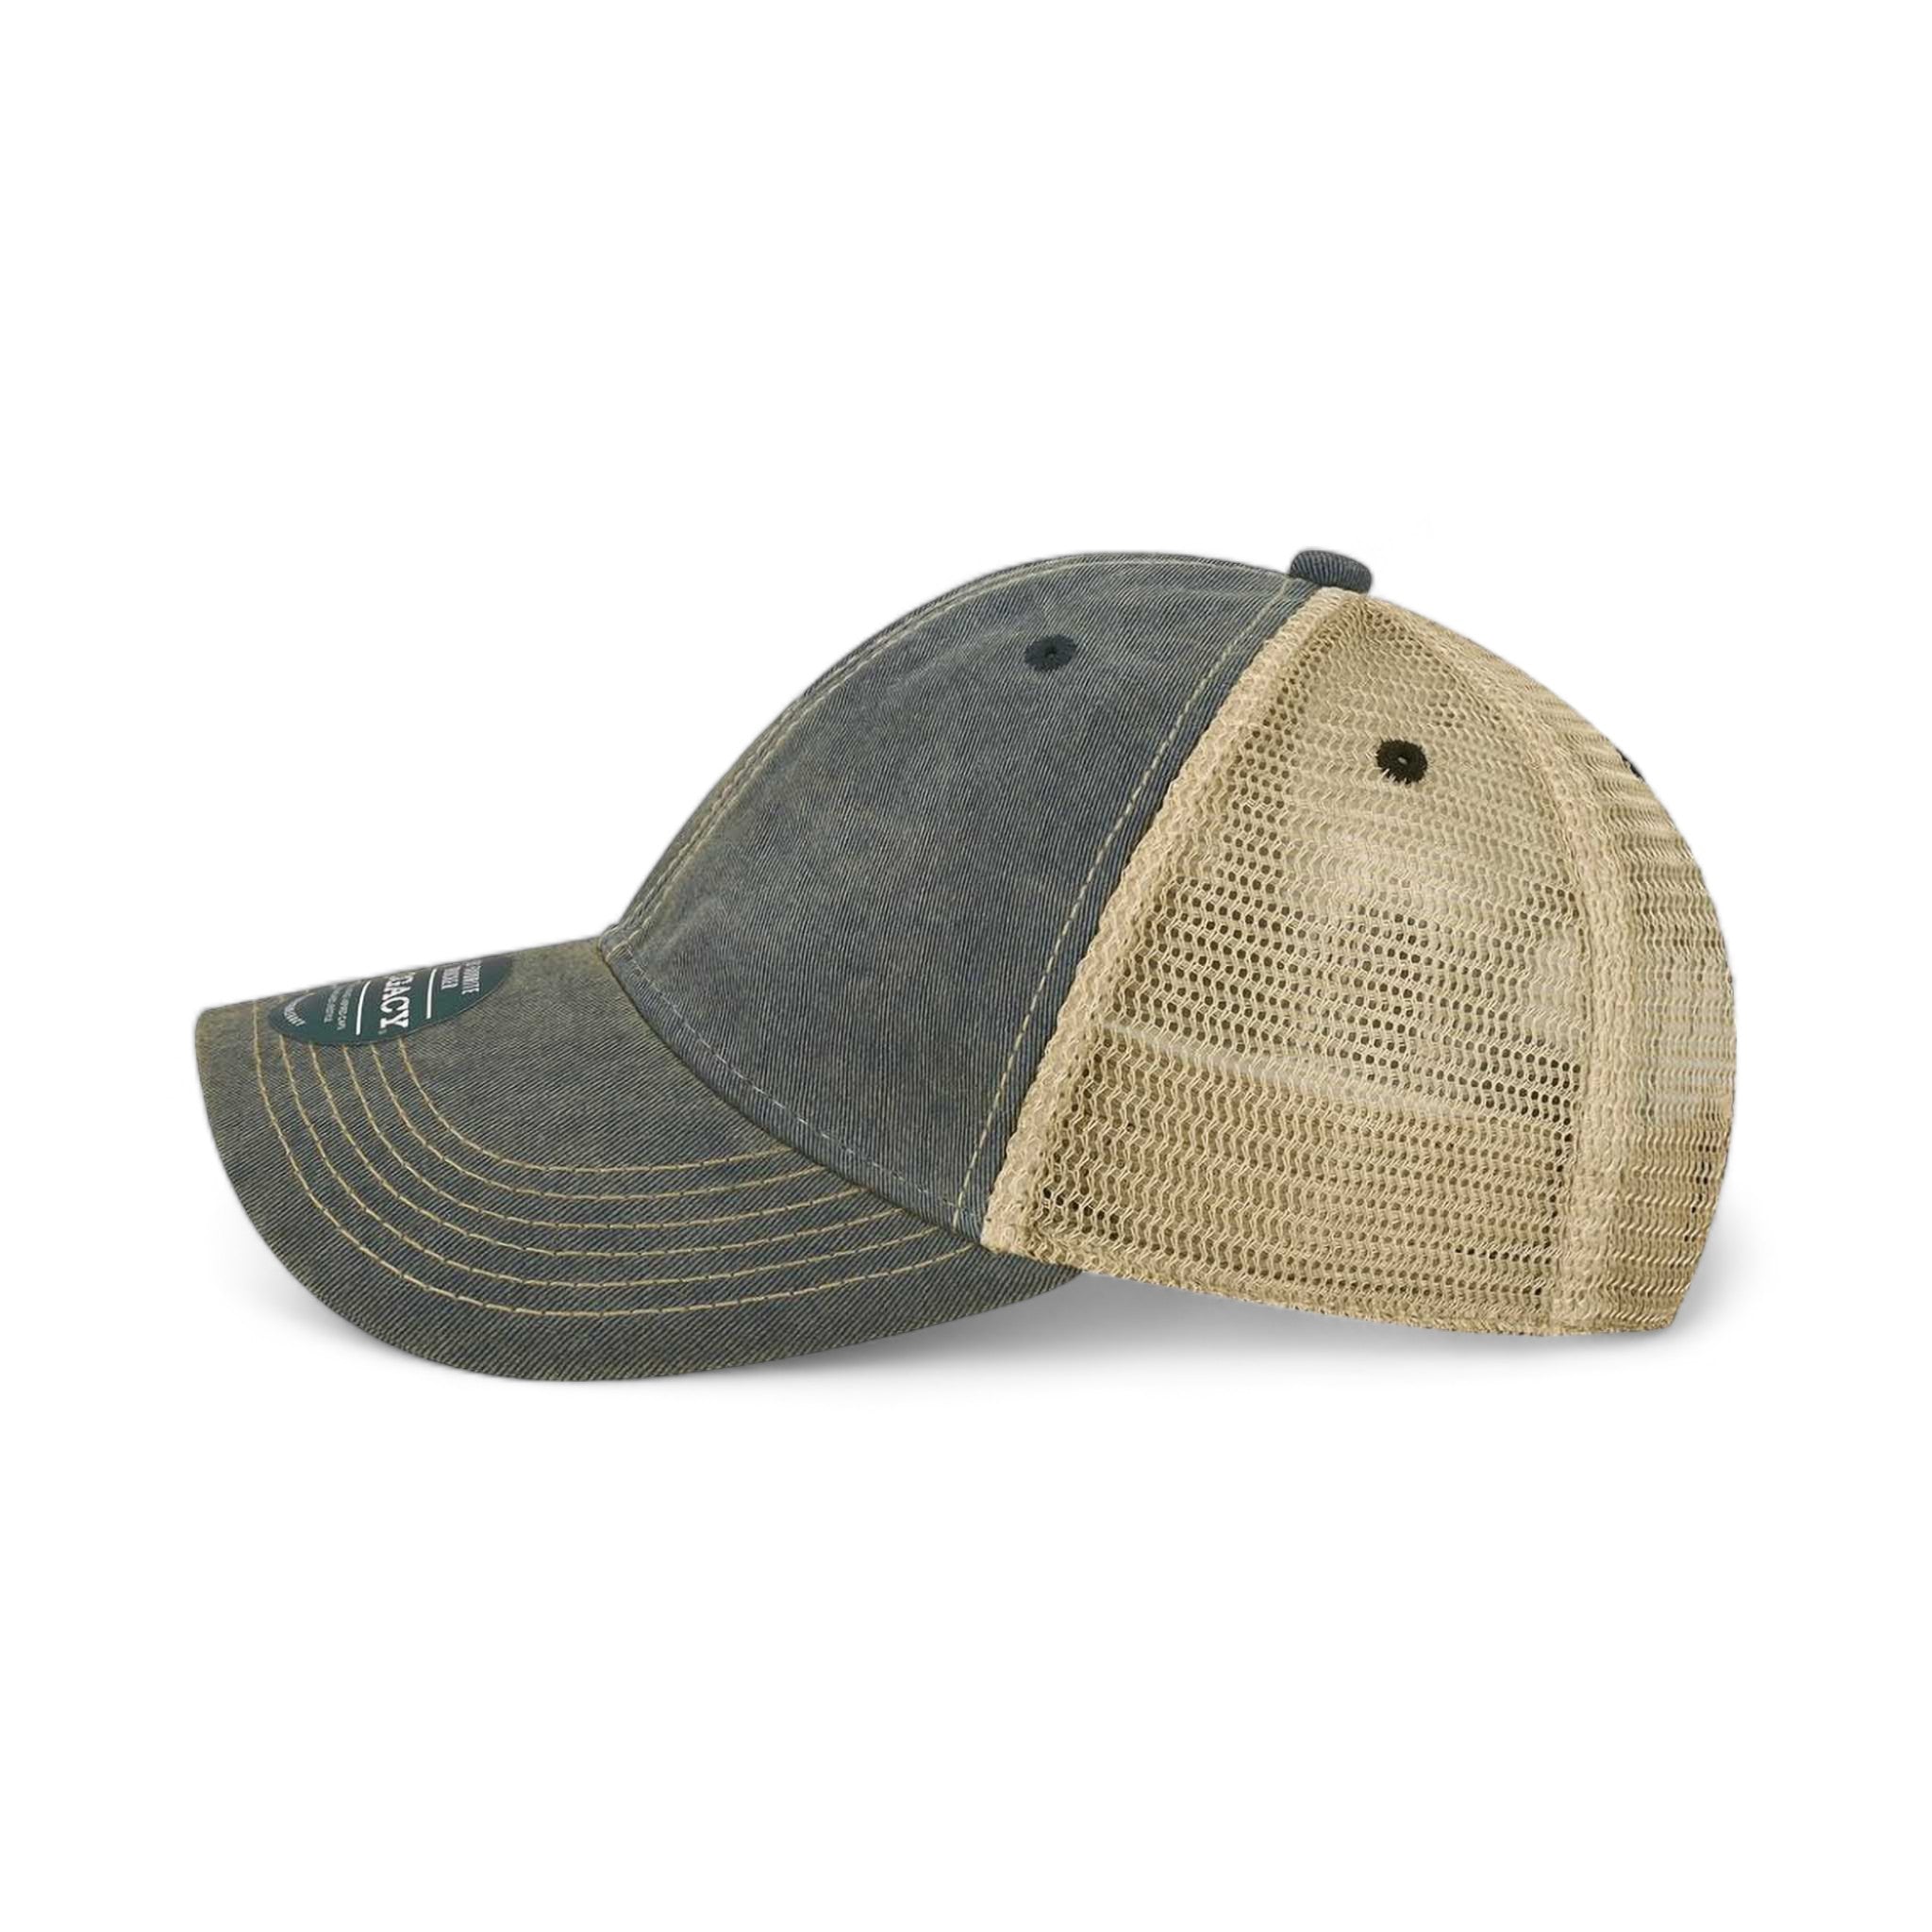 Side view of LEGACY OFAY custom hat in navy and khaki